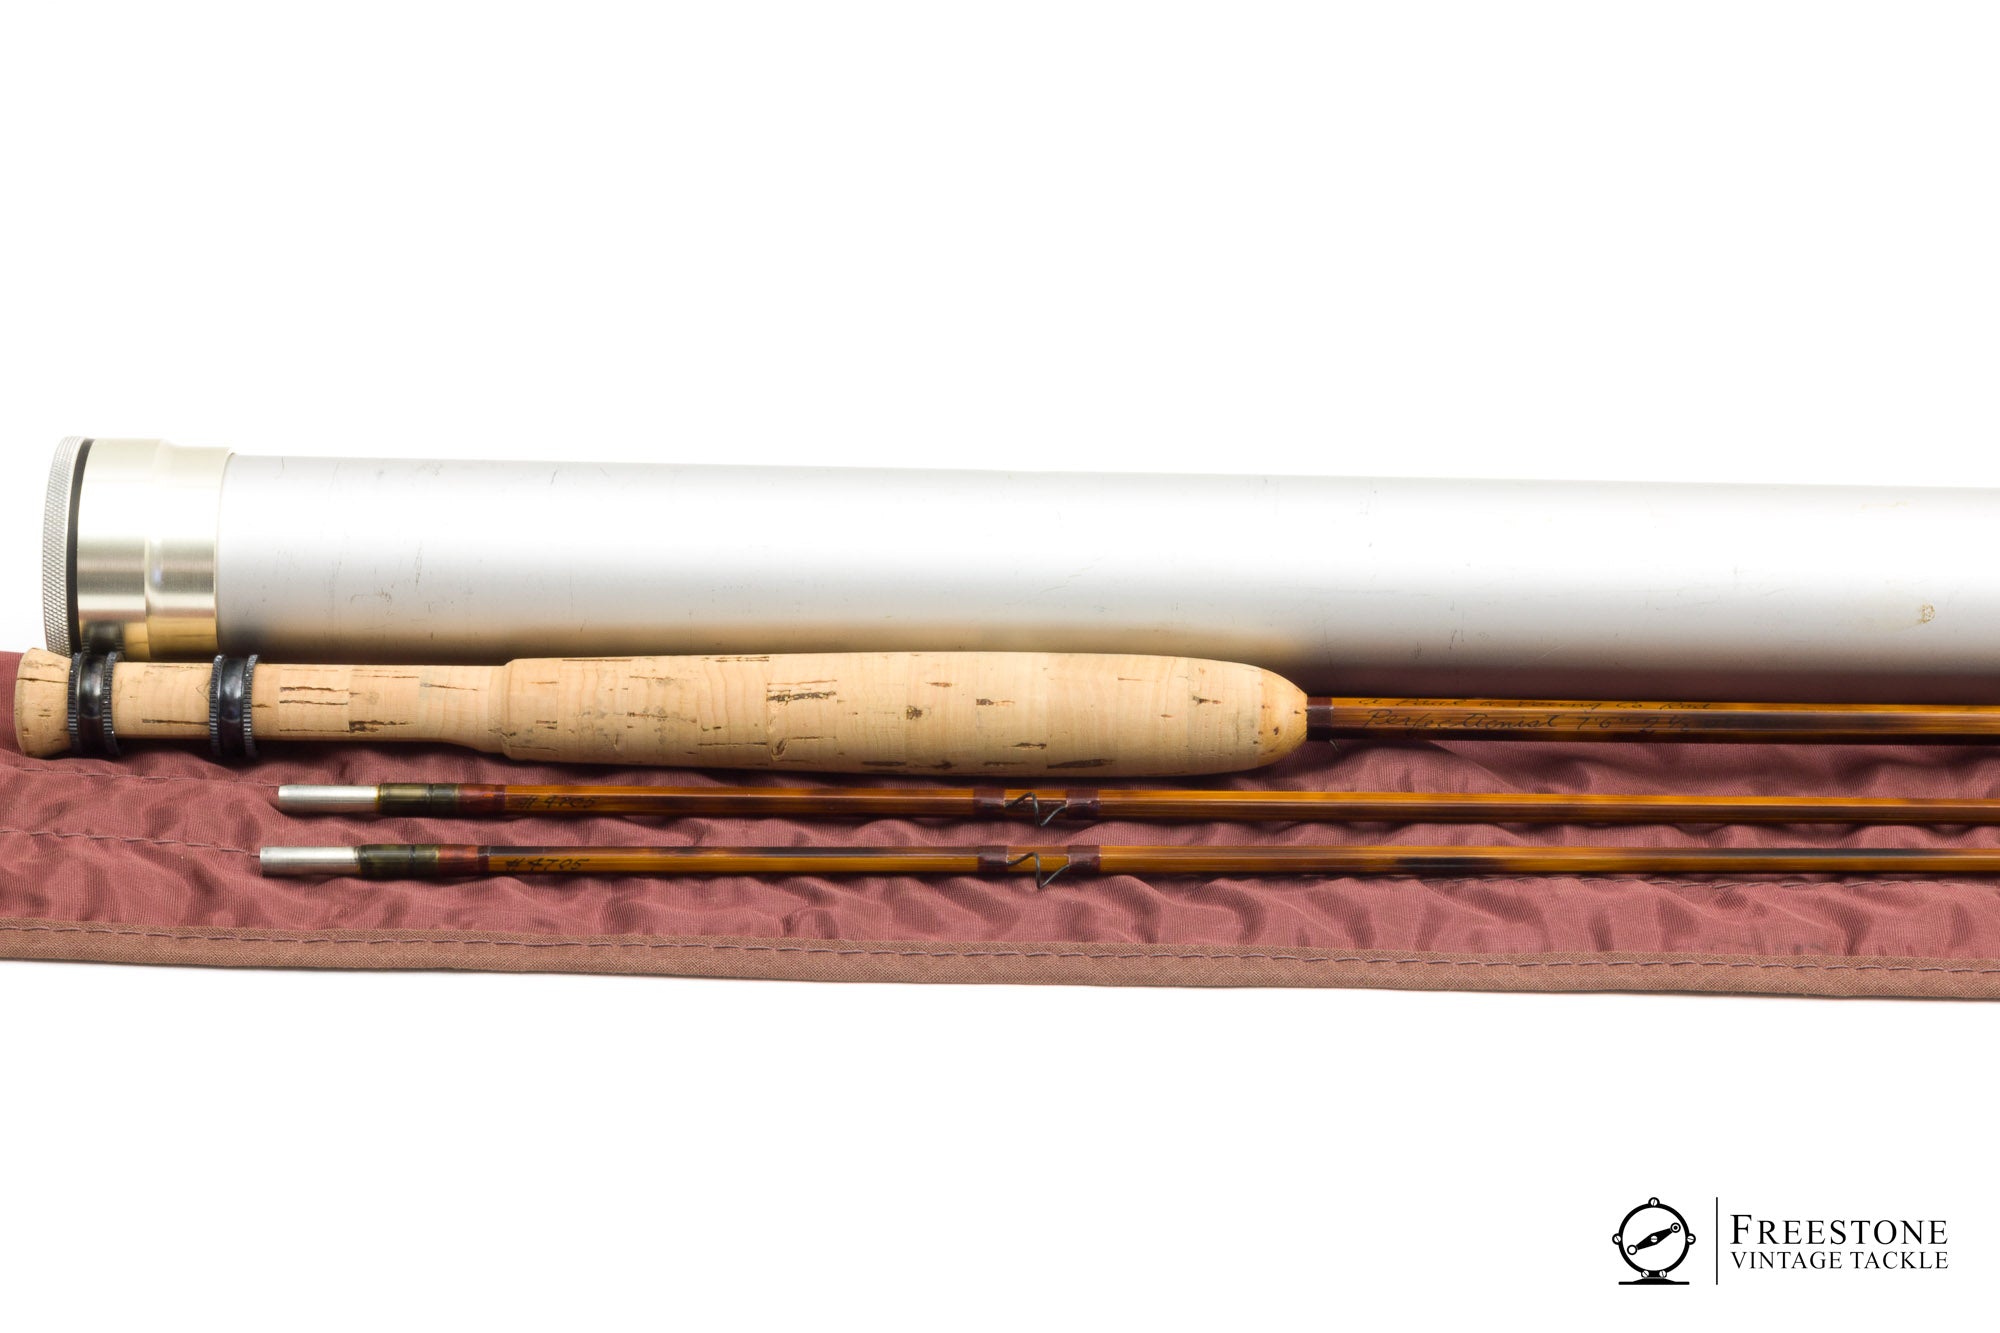 Paul H. Young - 'Perfectionist' 7'6 2/2, 4-5wt Bamboo Rod